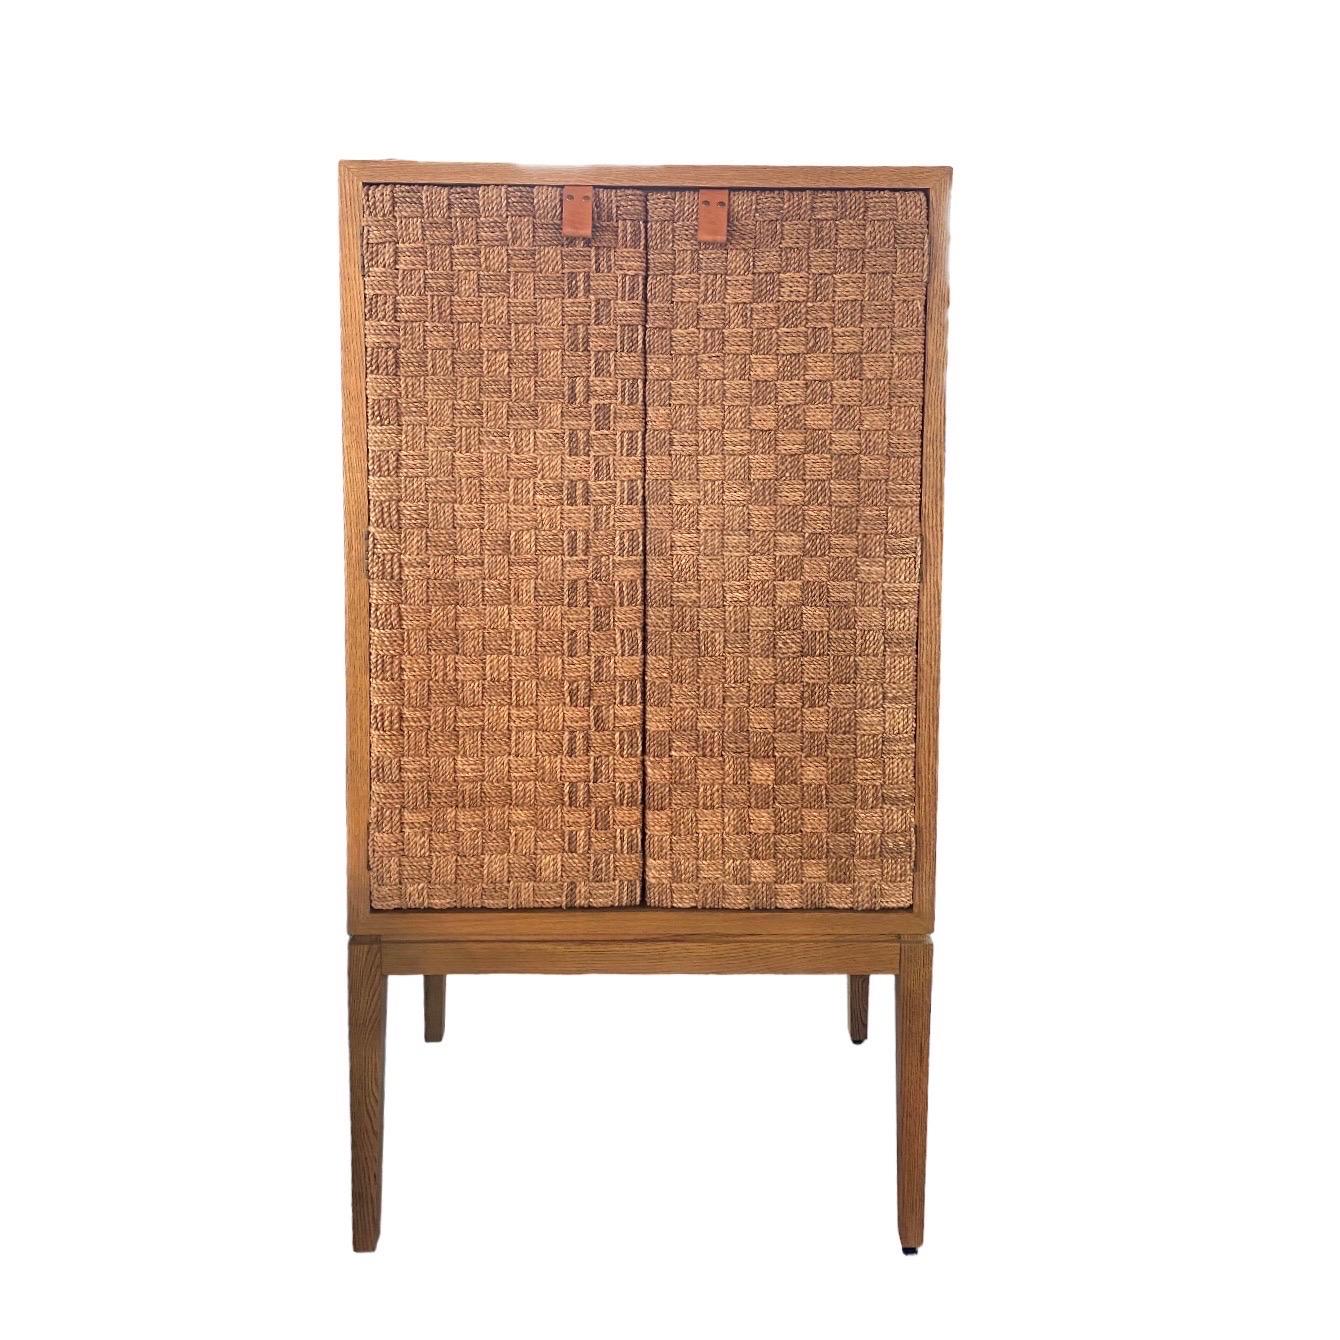 Rope Serena & Lily Caledonia Woven Bar Cabinet